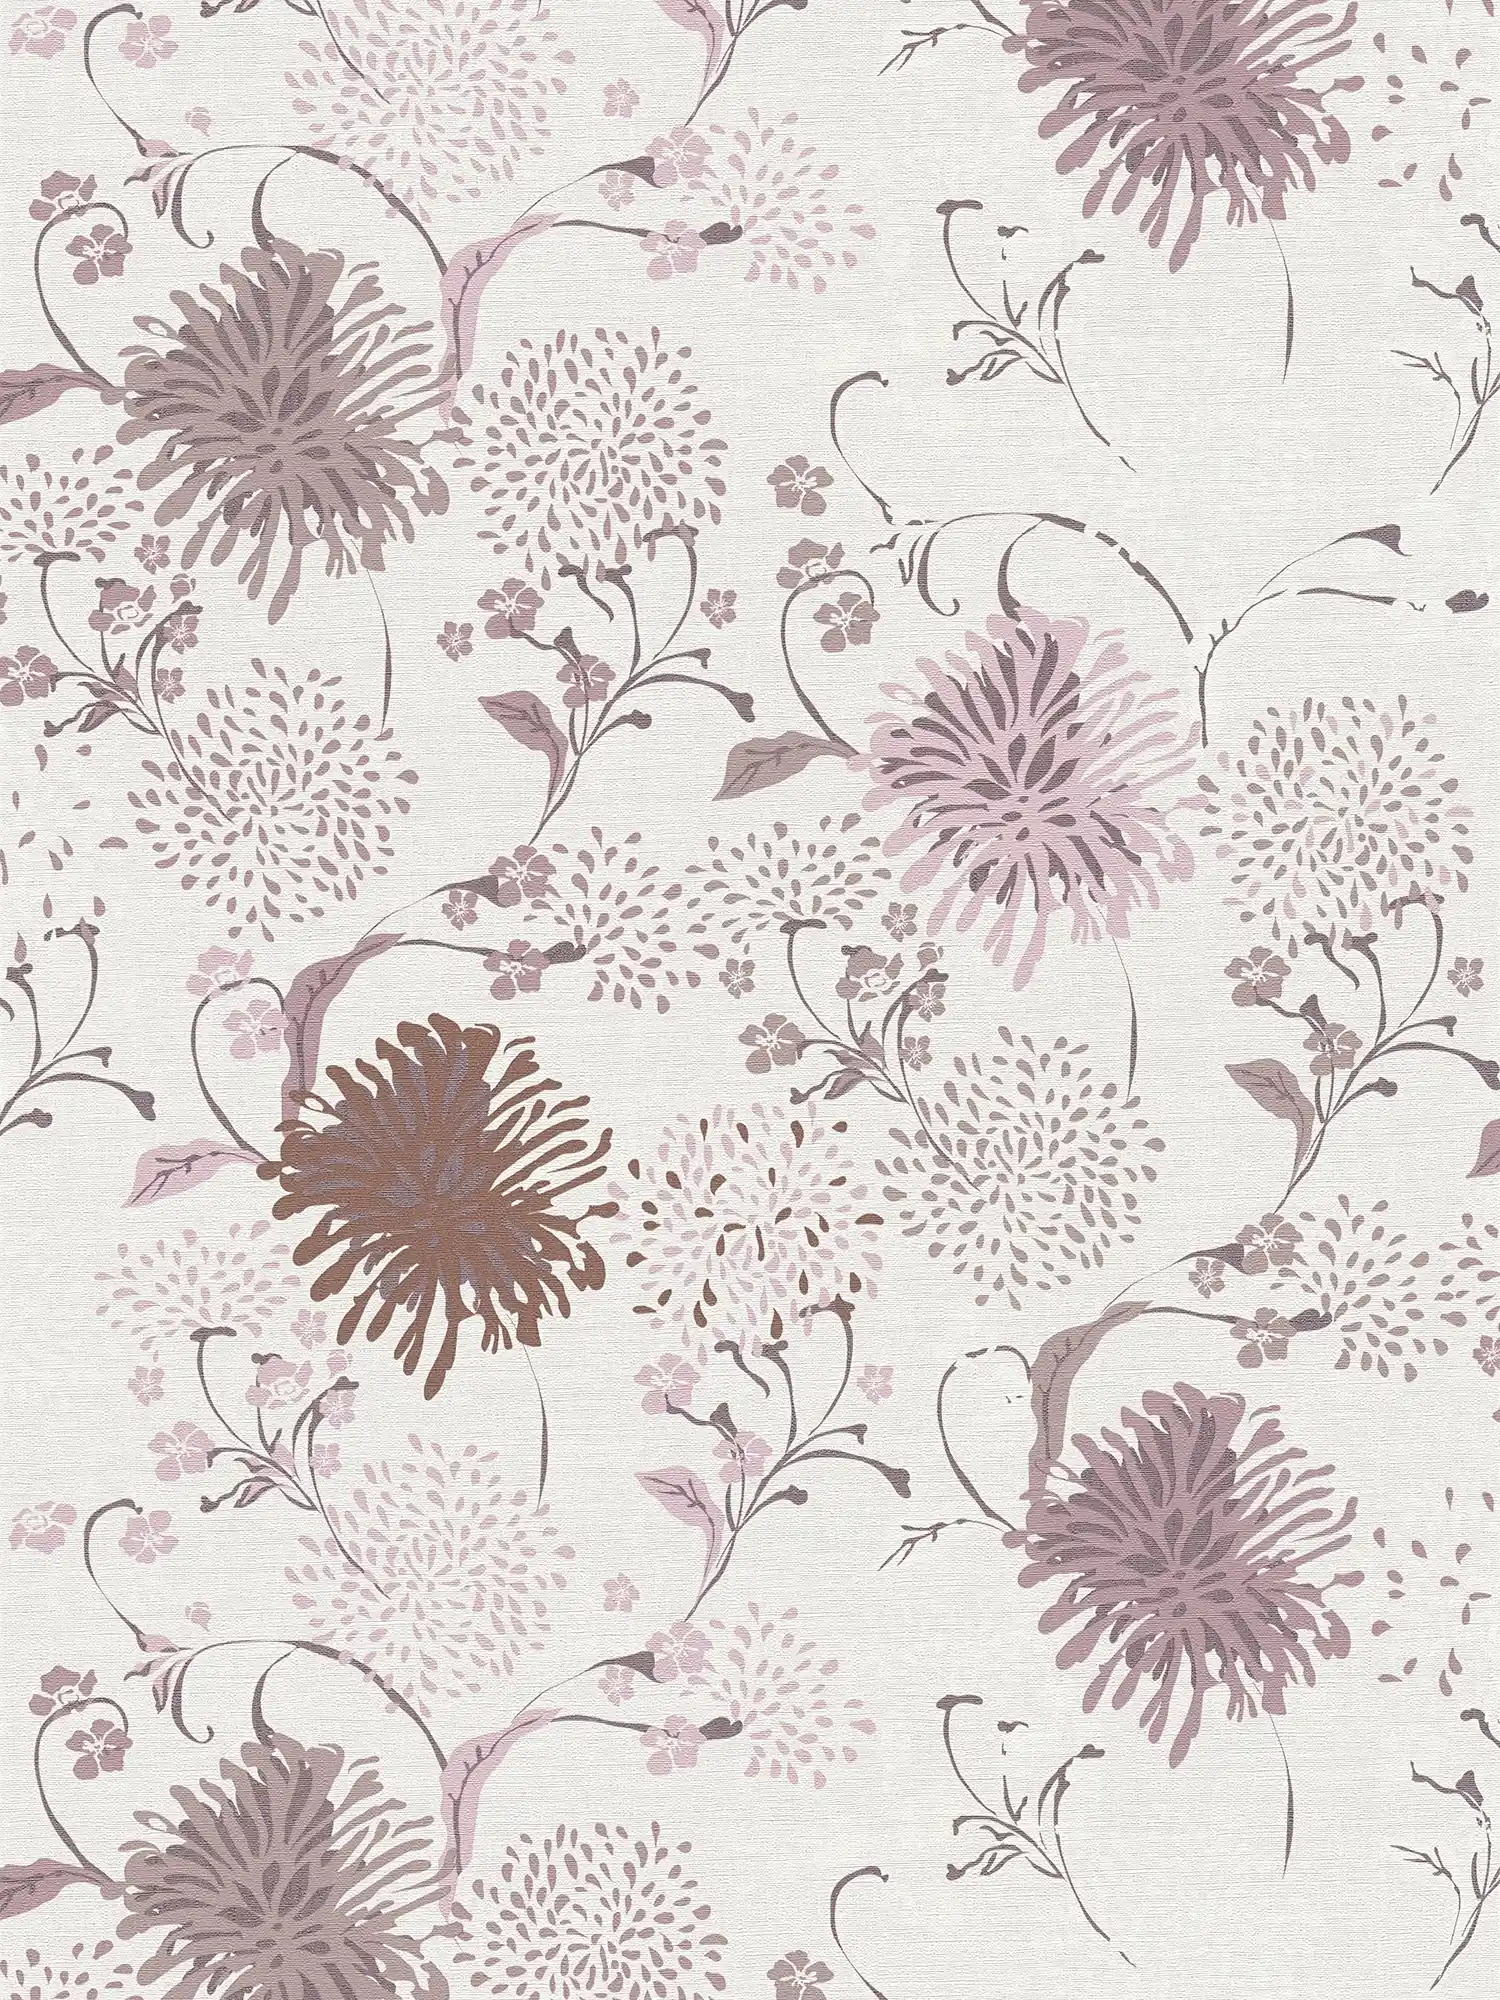 Floral non-woven wallpaper with dandelion pattern - cream, pink
